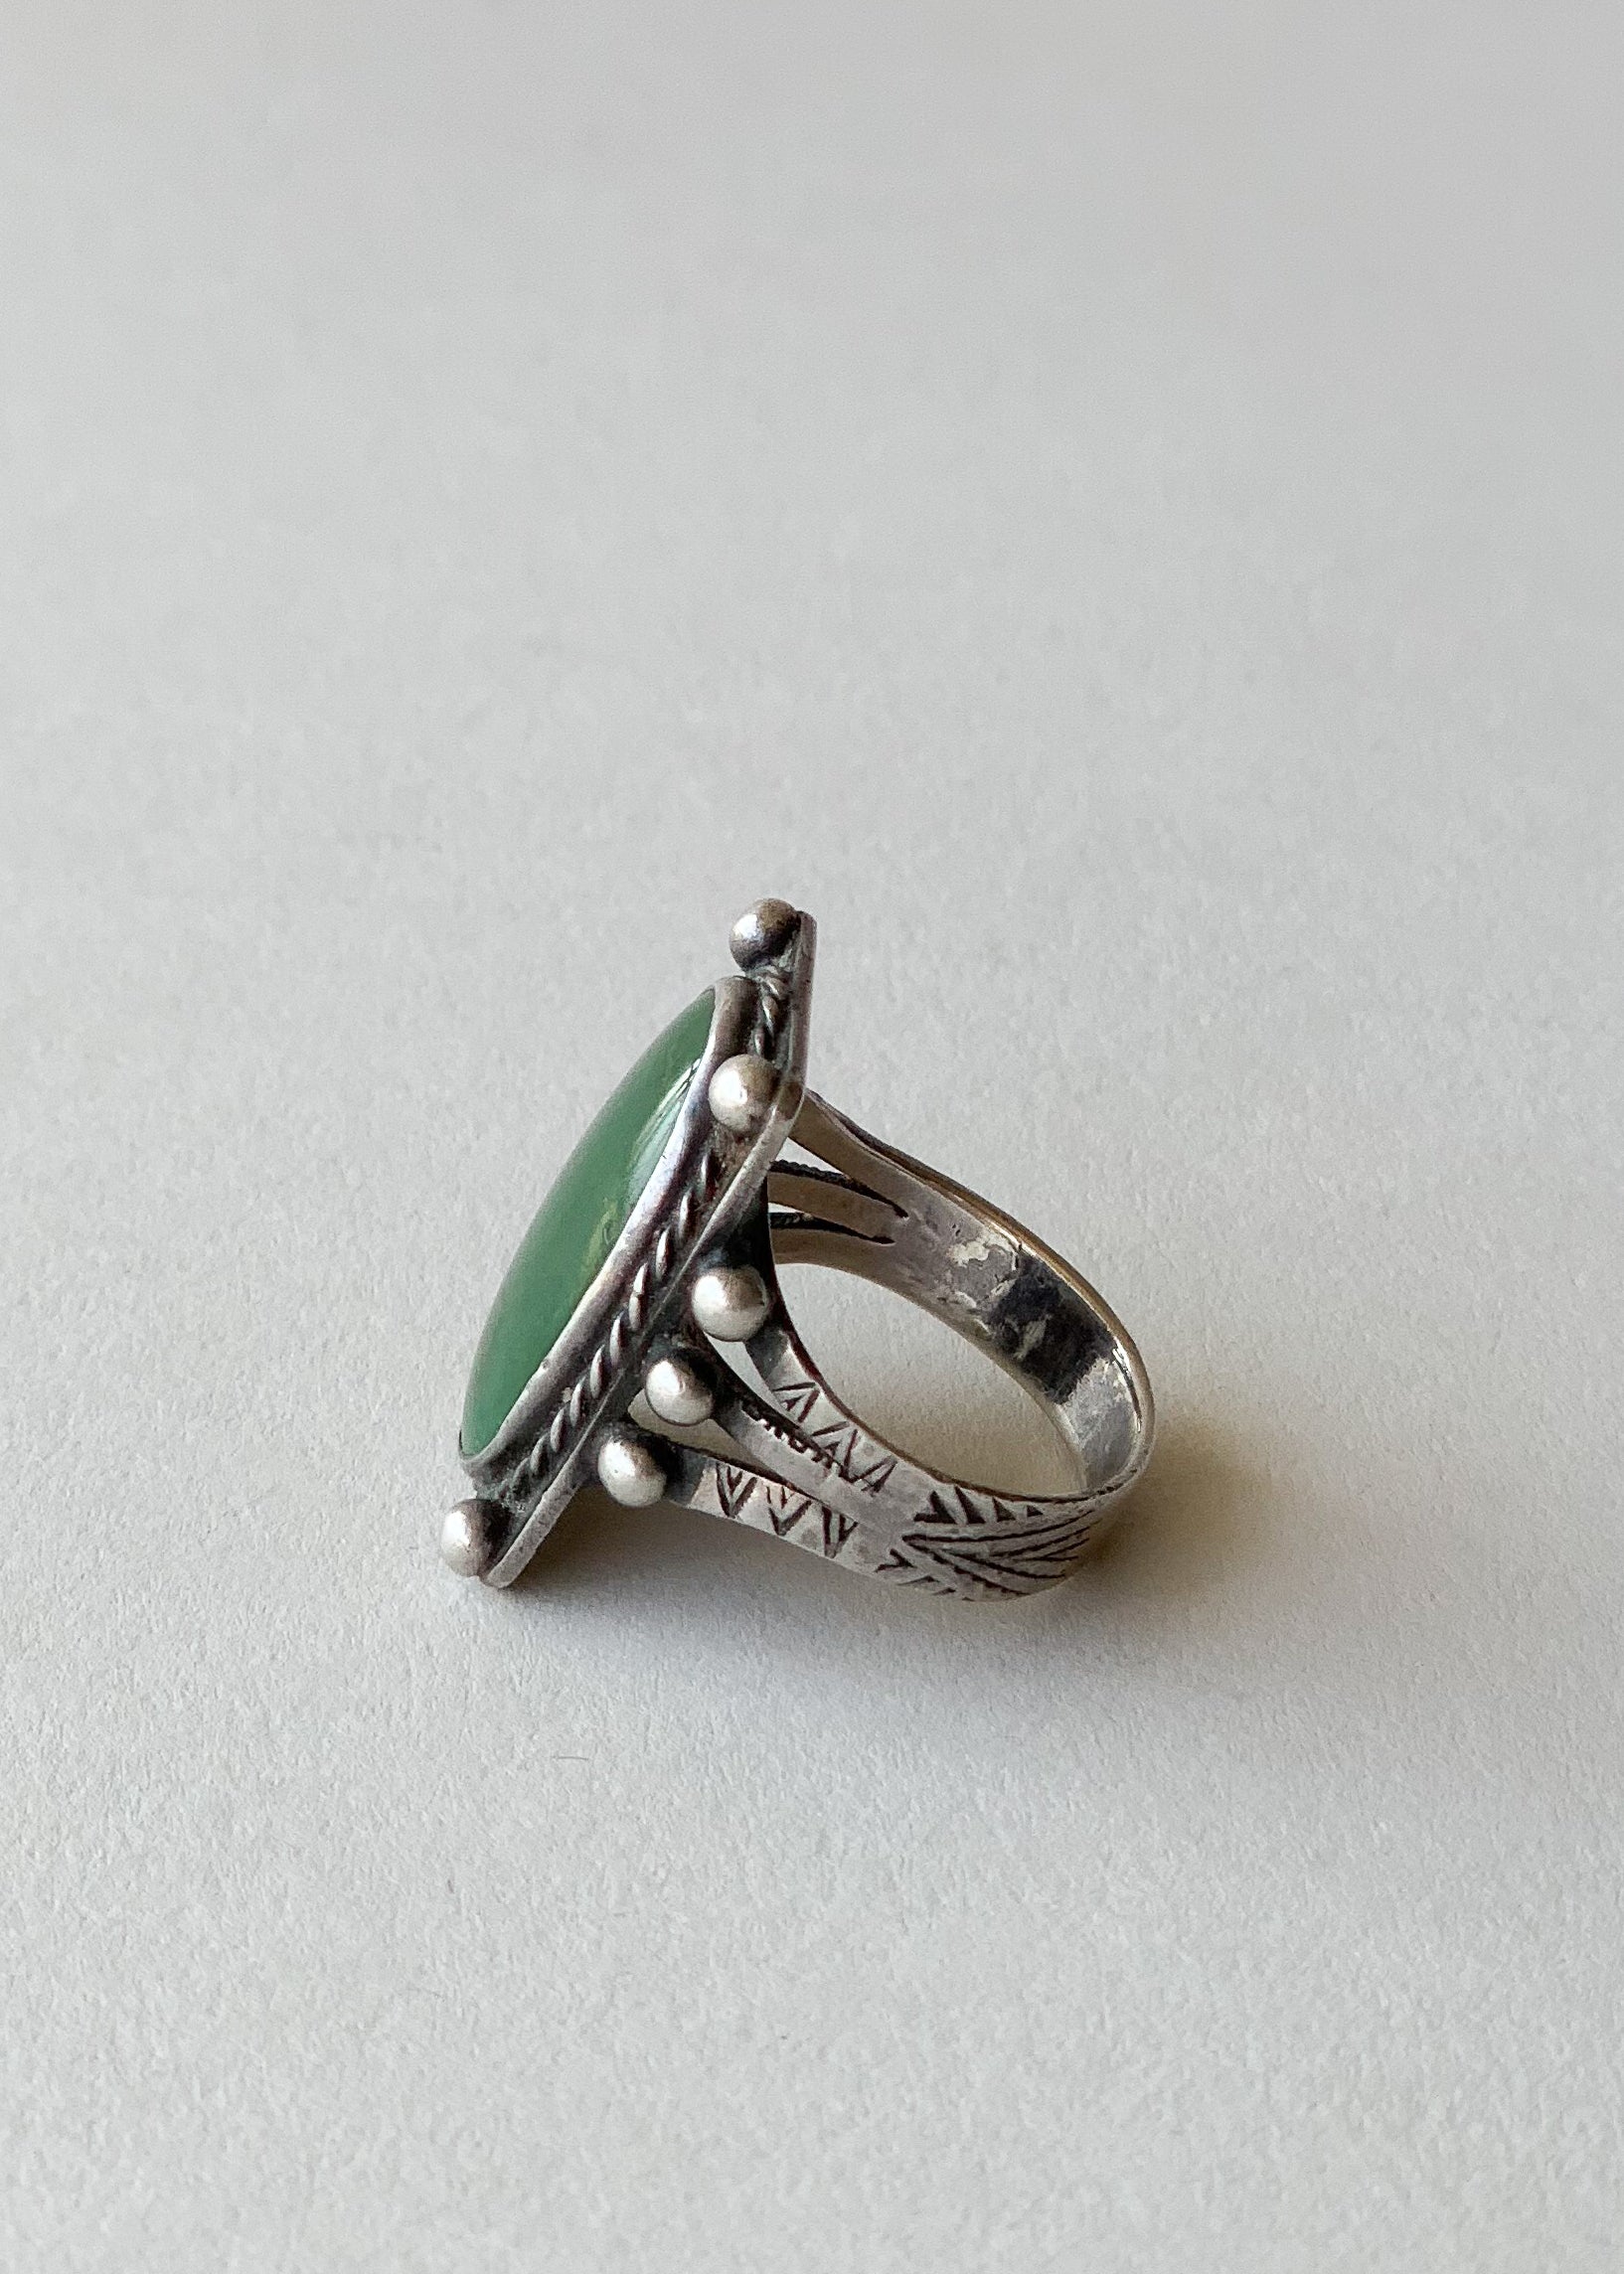 KISS WIFE Vintage Silver Punk Rings Set for Men, Cool Gothic Chunky Rings  Bulk, Skull Snake Spade Ace Malachite Stackable Hippie Knuckle Rings Pack,  Trendy Men's Jewelry Gift for Him|Amazon.com